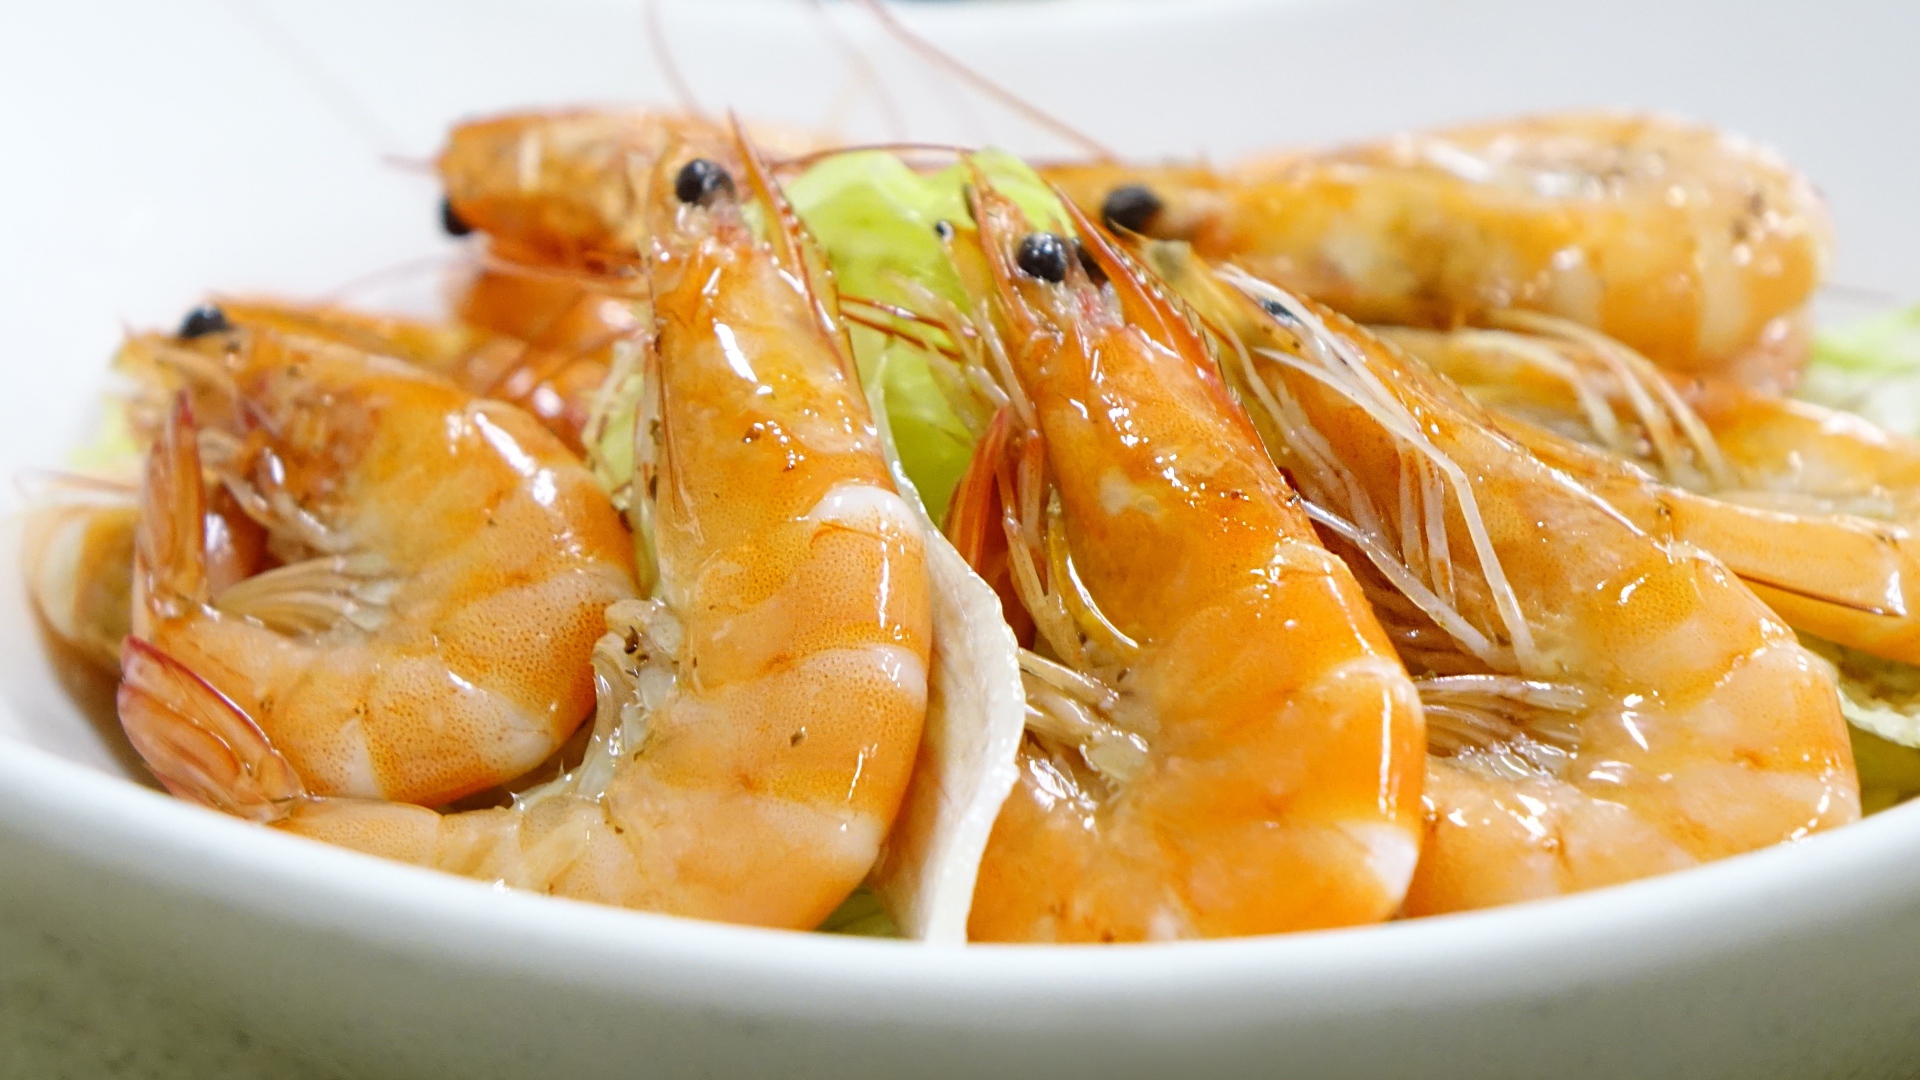 Boiled shrimps in a plate